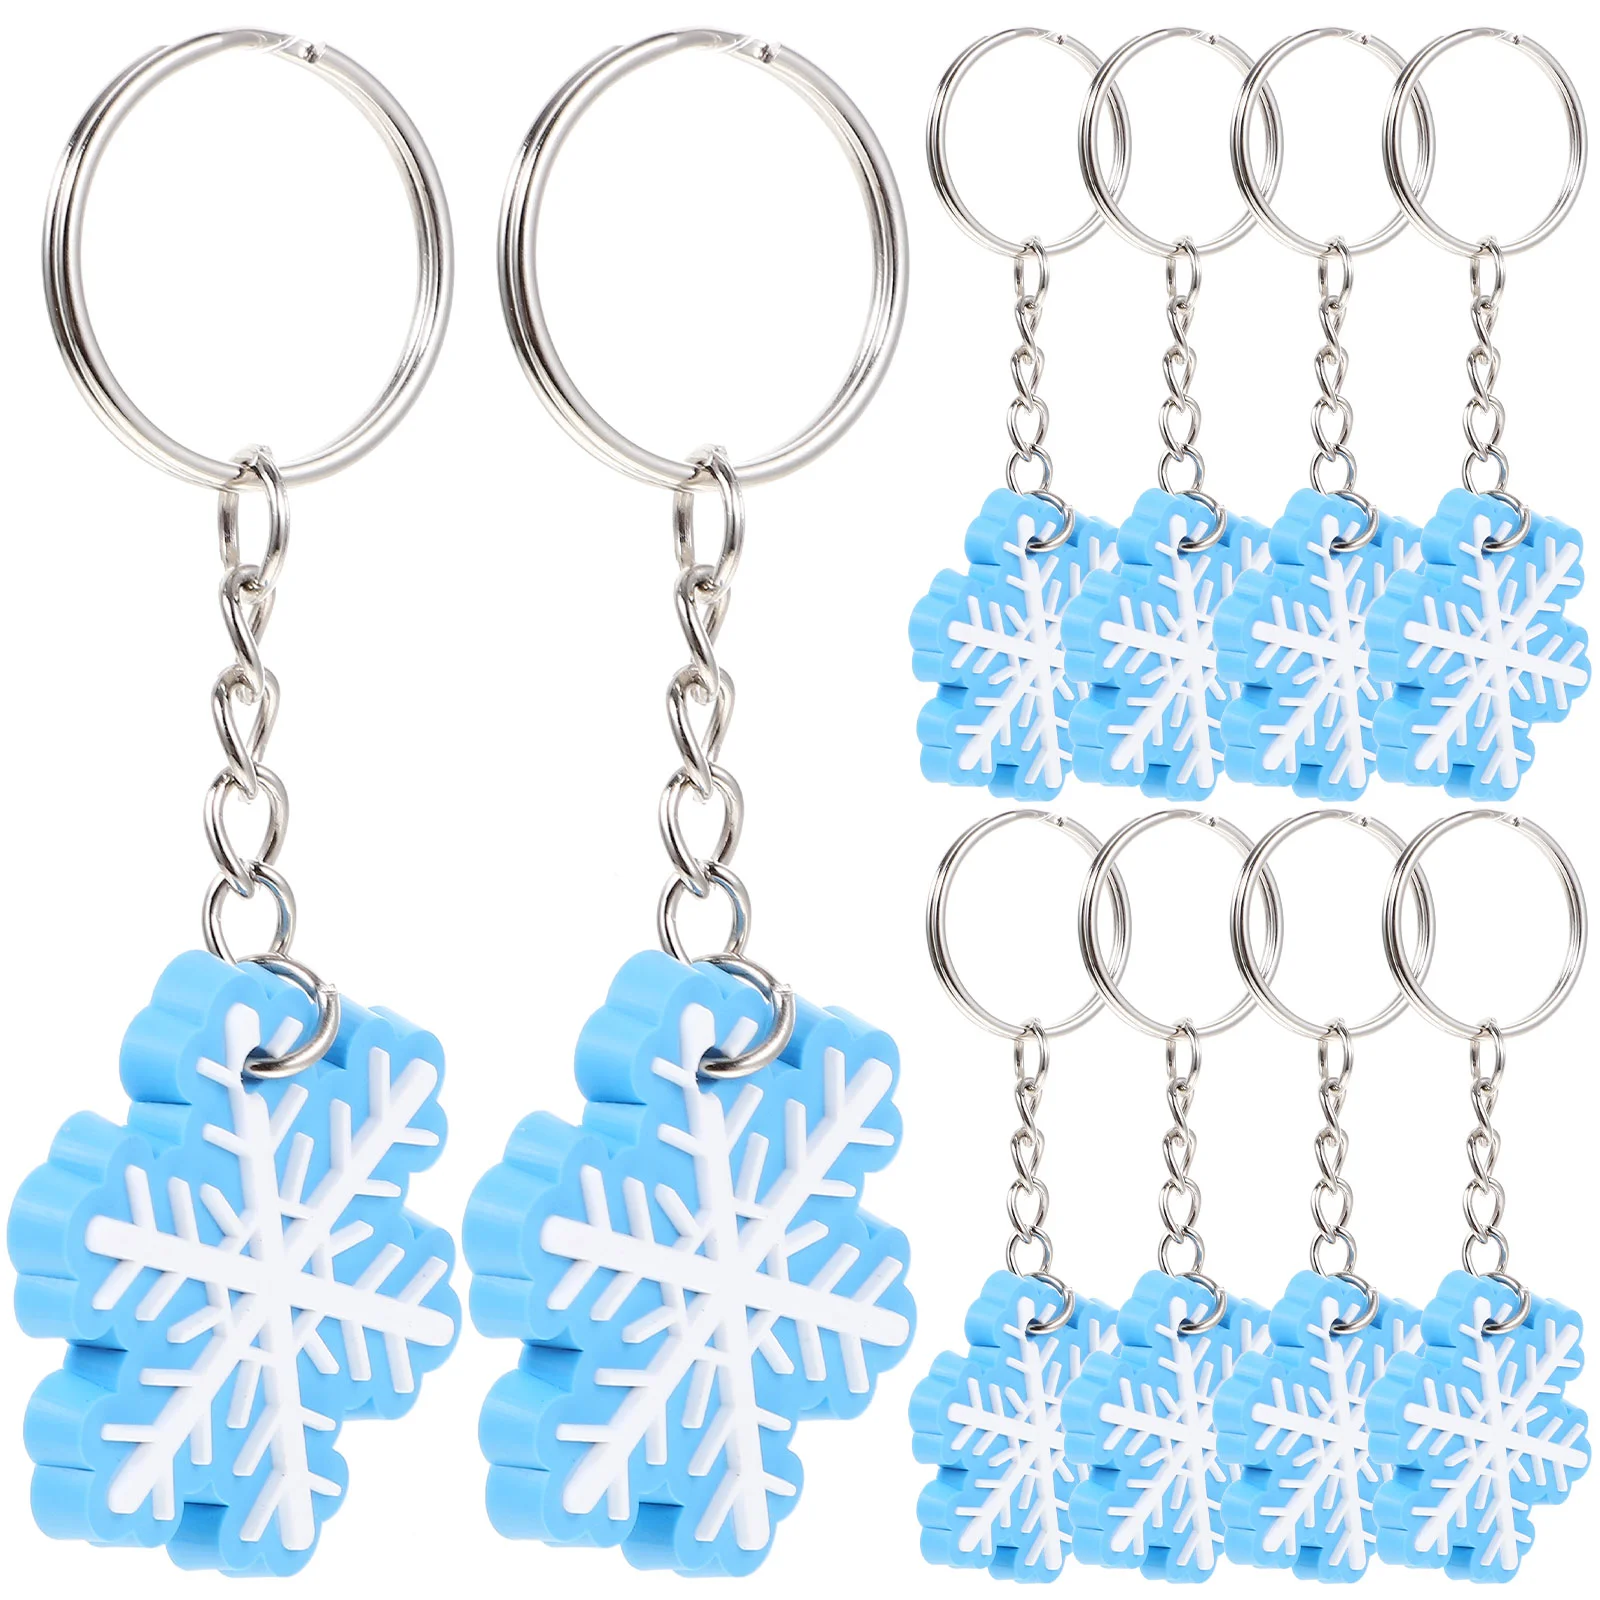 

Hanging Keychains Adorable Christmas Party Favors Snowflake Xmas Rings Tree Decorations